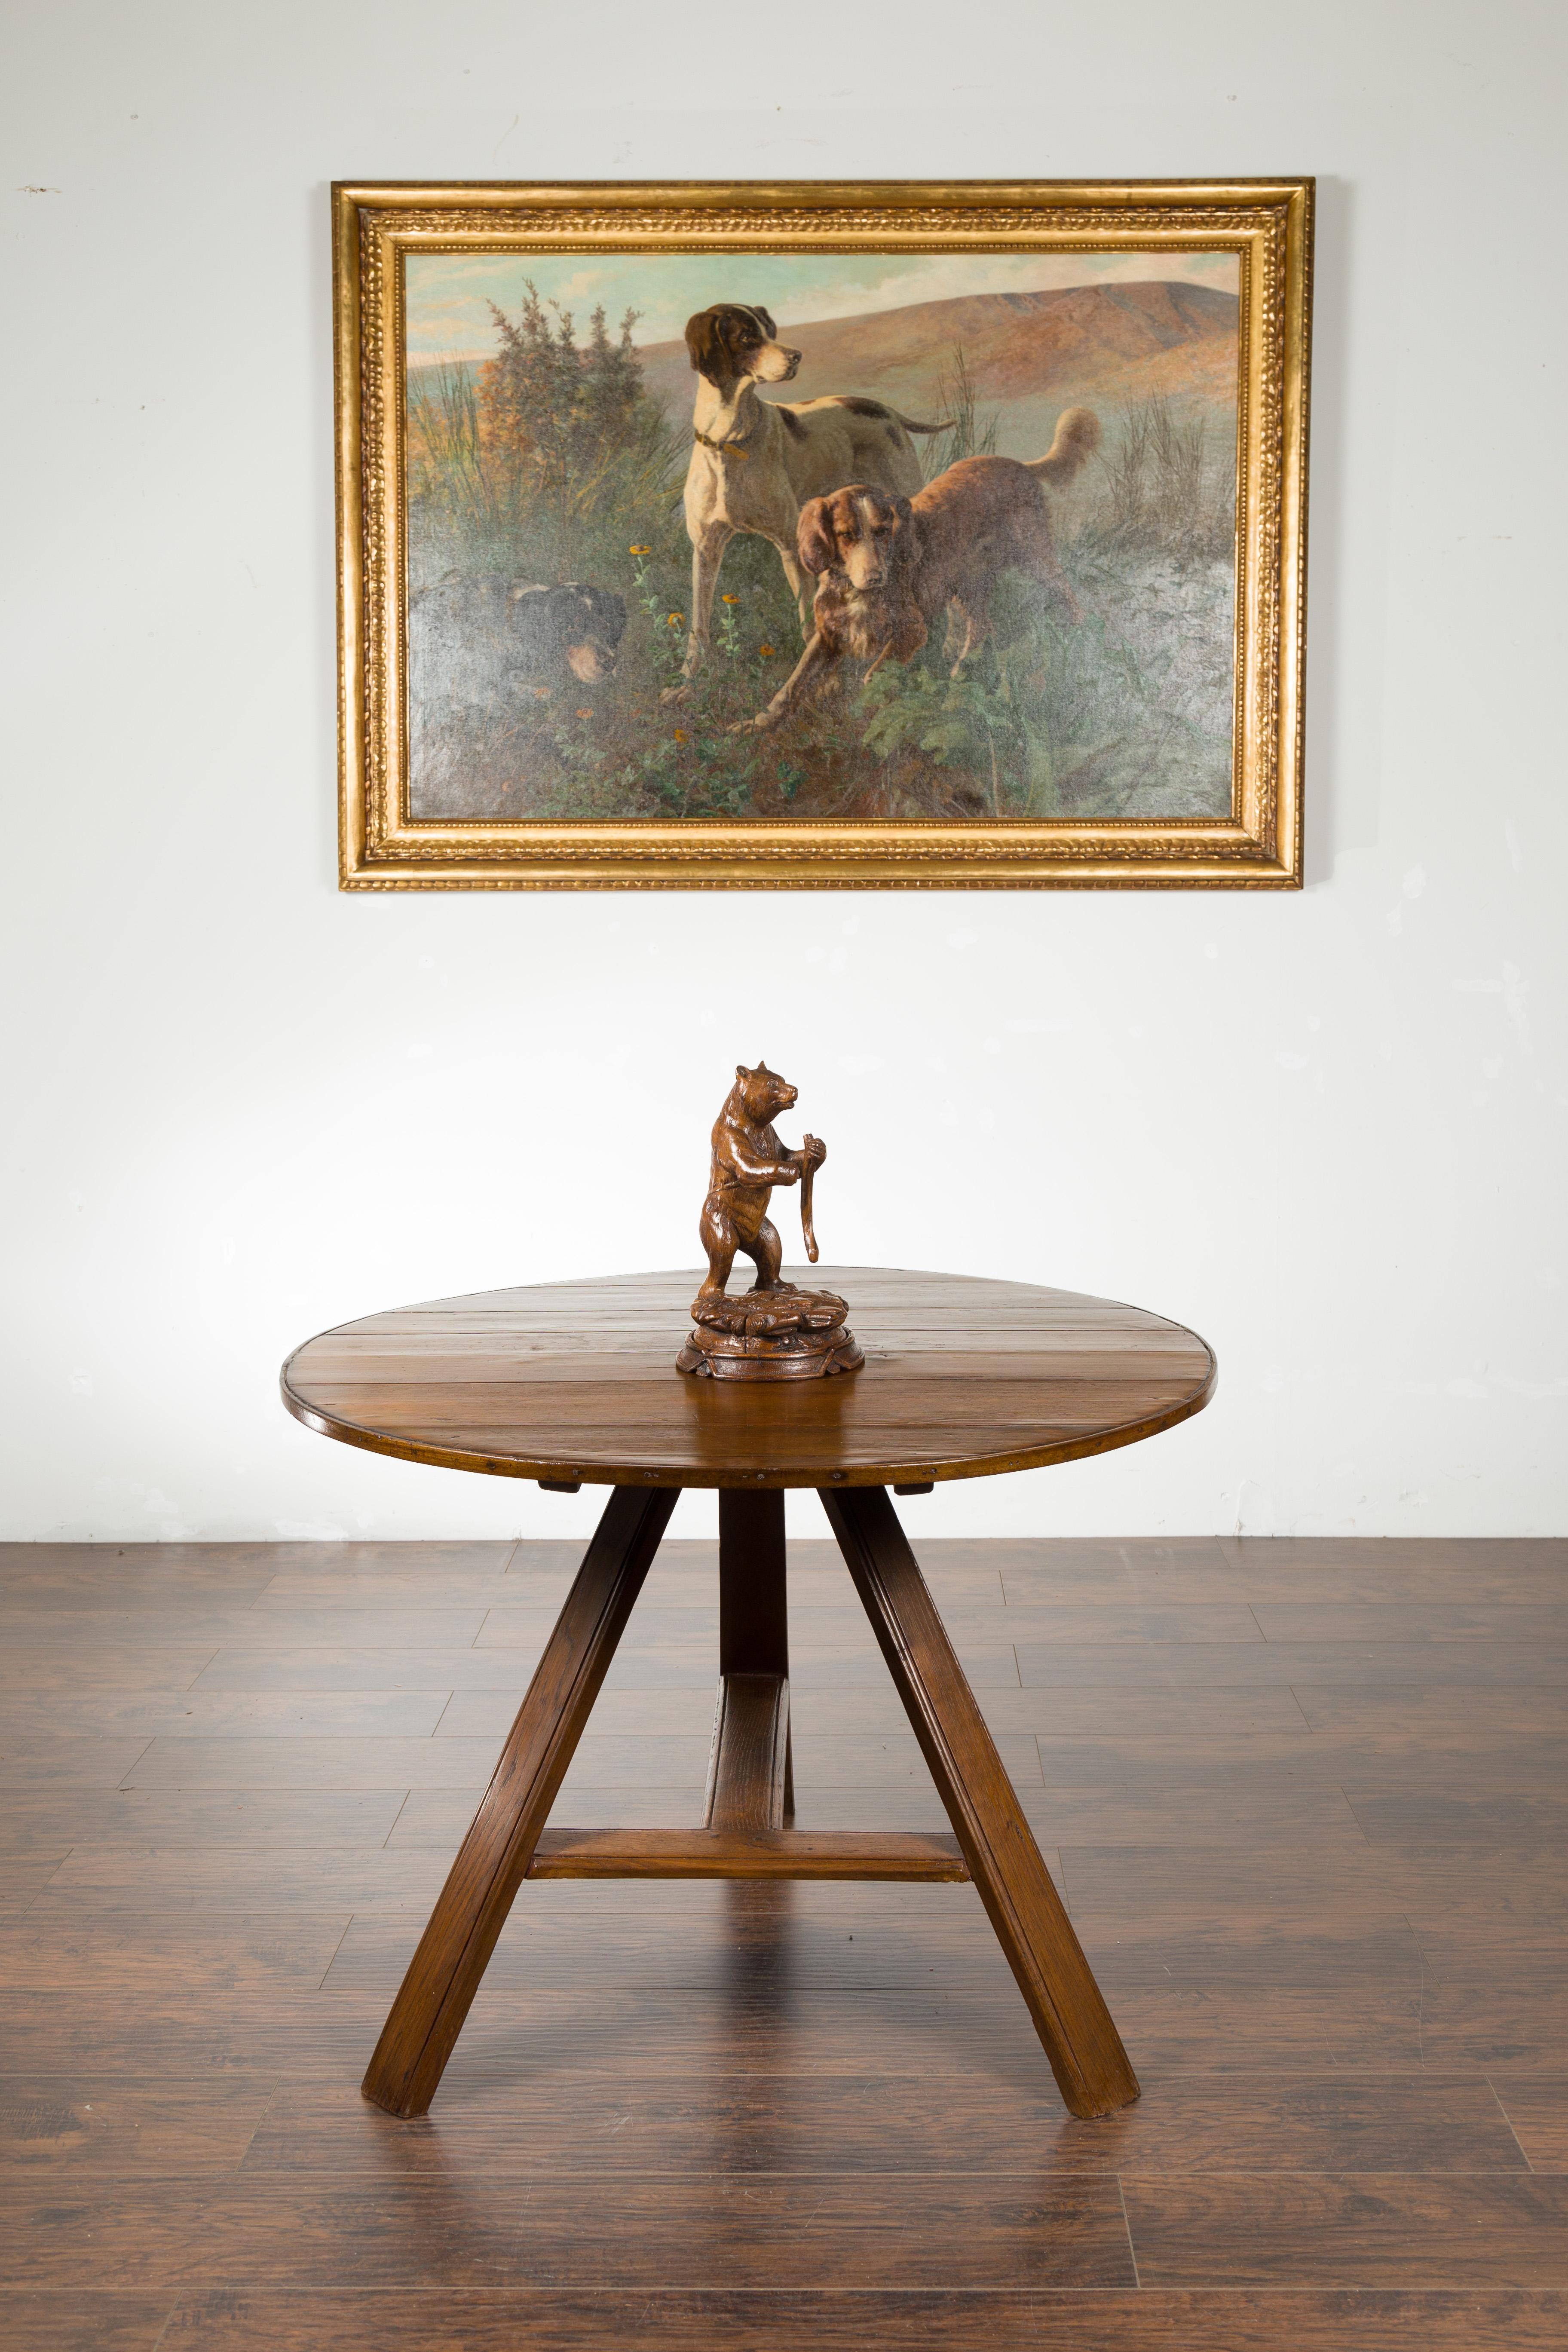 A Black Forest carved wooden sculpture from the late 19th century, depicting a bear standing on a circular base. Created during the last decade of the 19th century, this Black Forest sculpture features a bear standing on his rear legs and holding a